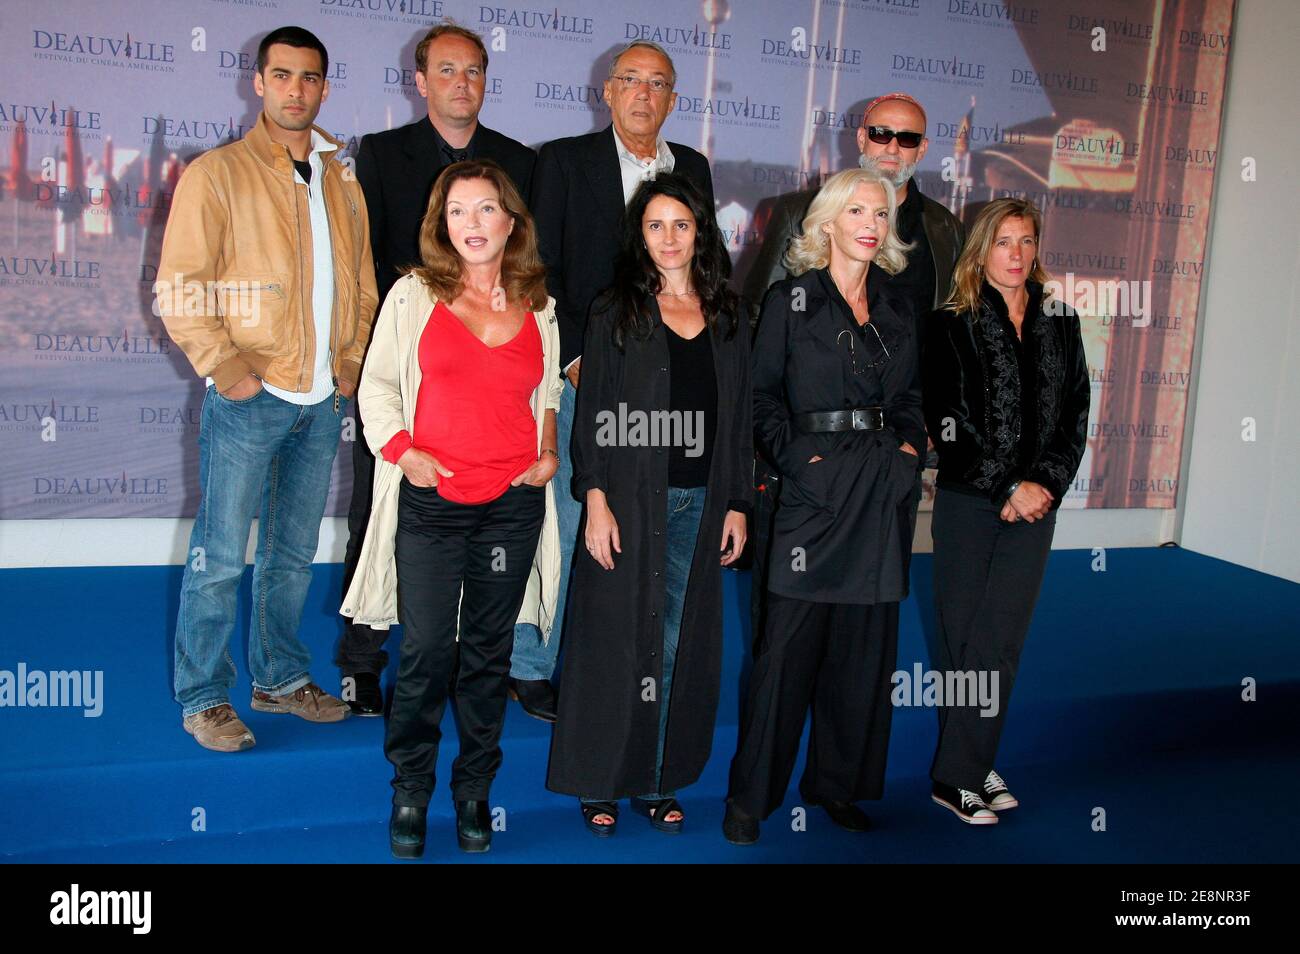 Jury's member (L to R) Nicolas Cazale, Marie-France Pisier, Anouk Grinberg, Odile Barski, Emilie Deleuze, Xavier Beauvois, Andre Techine, Charlelie Couture attend the photocall at International Deauville center during the 33rd American Film Festival in Deauville, Normandy, France, on September 3, 2007. Photo by Denis Guignebourg/ABACAPRESS.COM Stock Photo